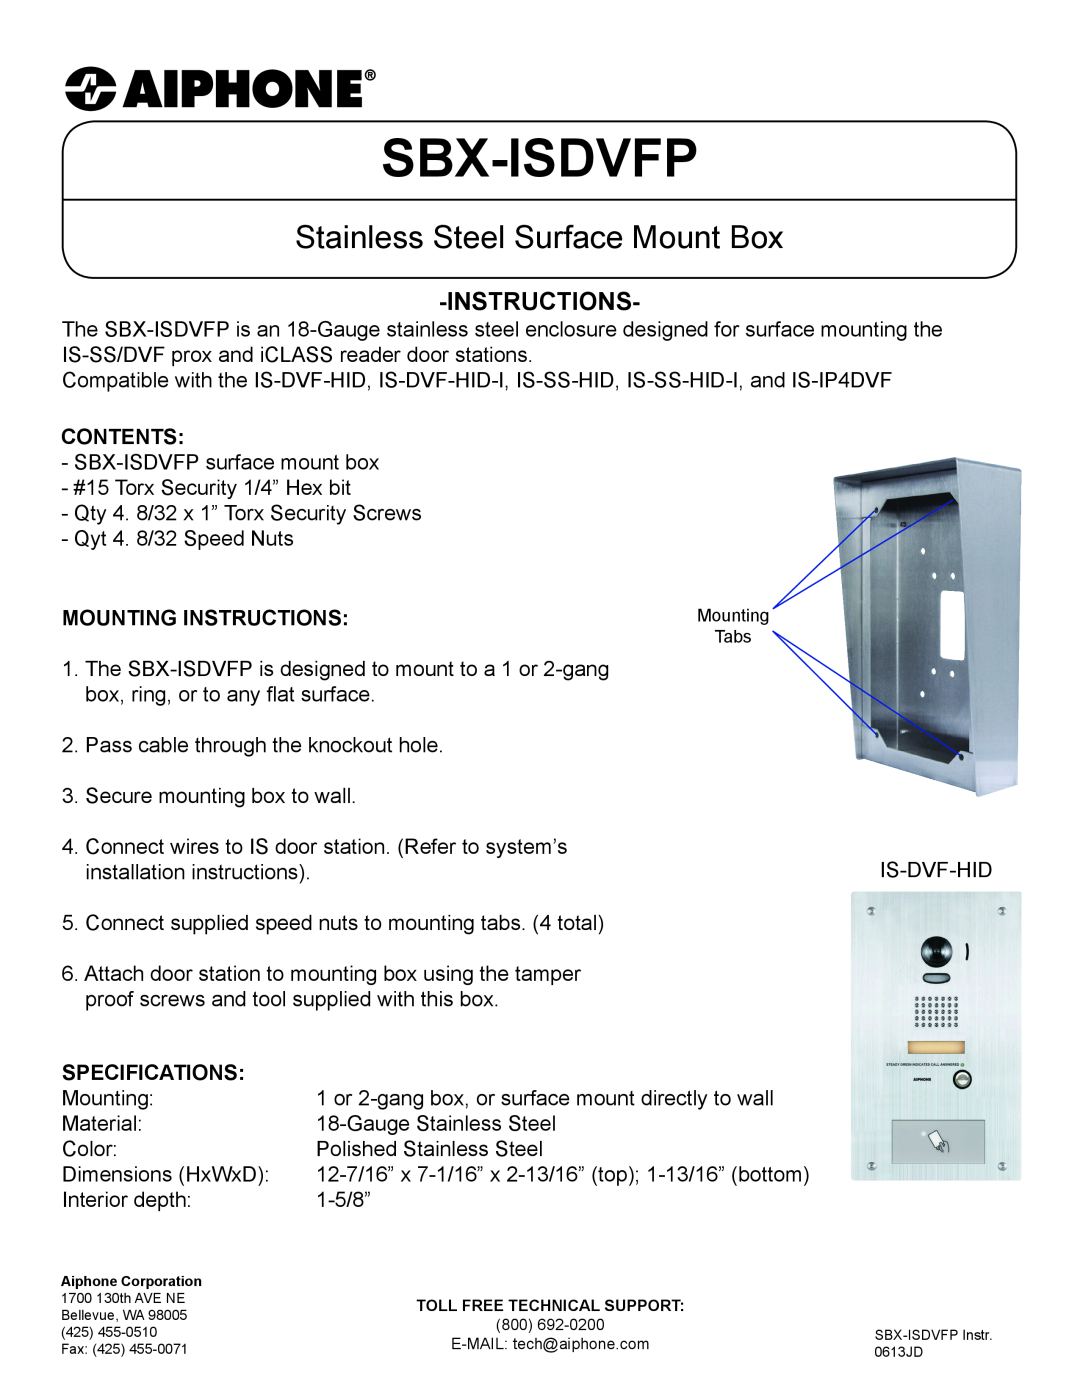 Aiphone SBX-ISDVFD installation instructions Sbx-Isdvfp, Stainless Steel Surface Mount Box, Instructions, Contents 